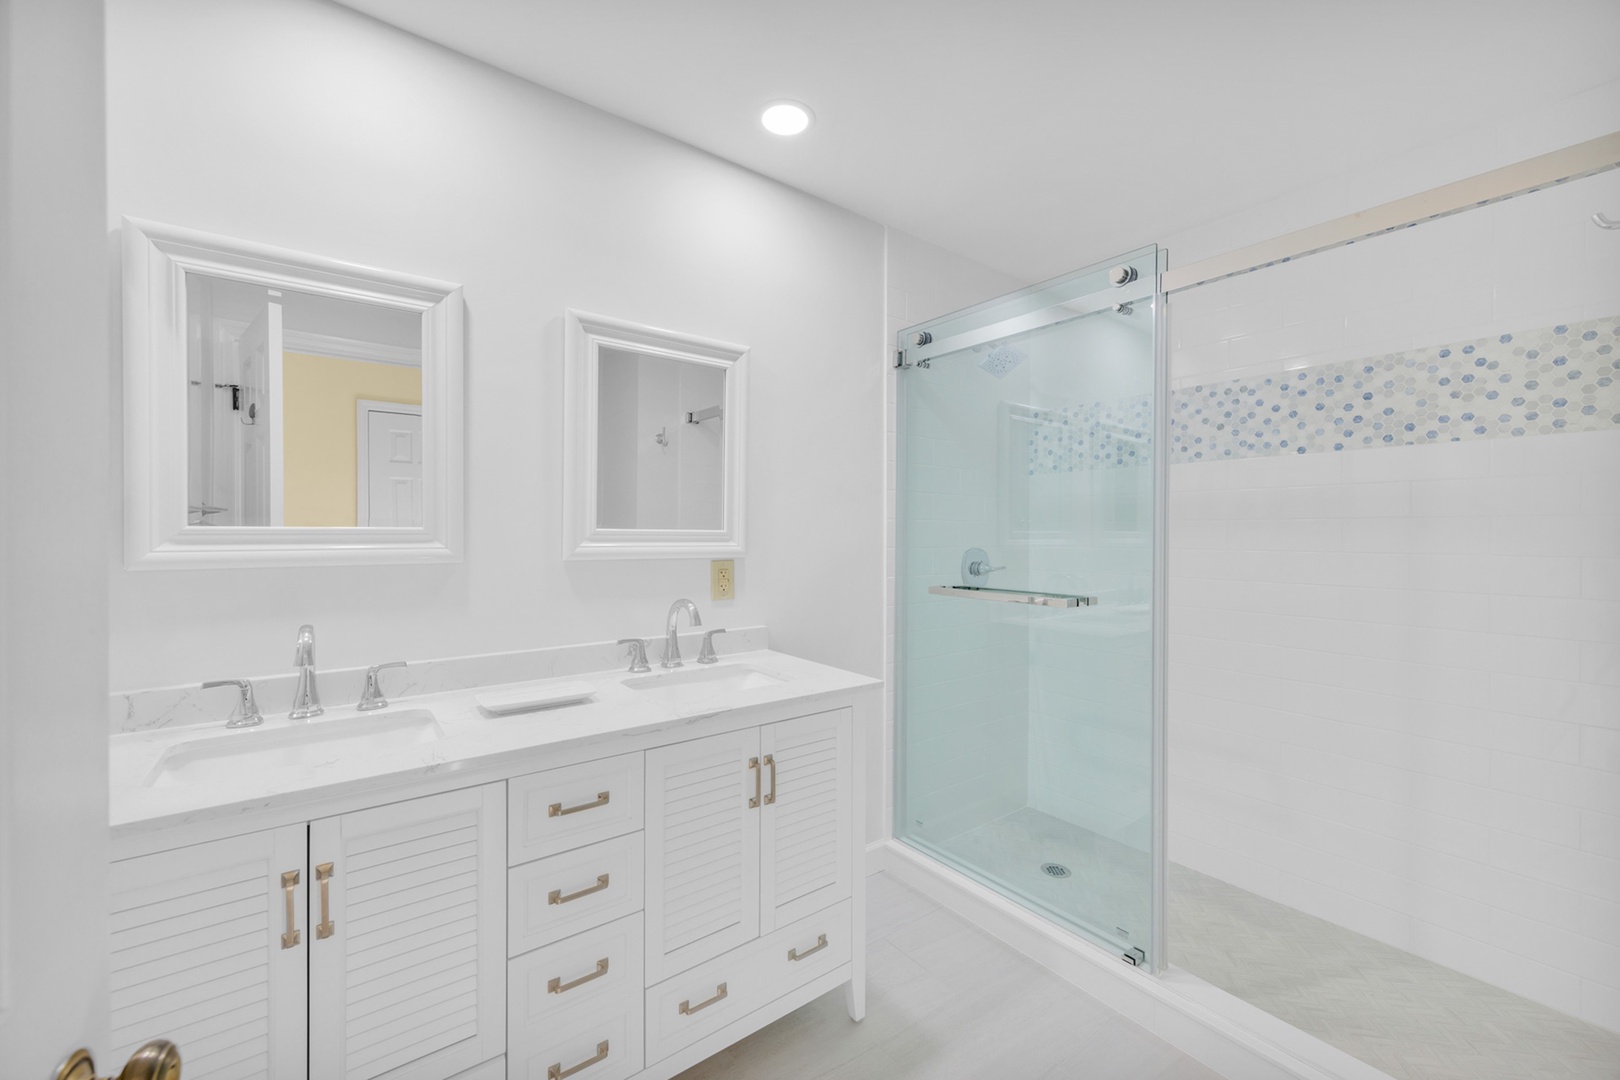 The private ensuite offers a double vanity & glass walk-in shower